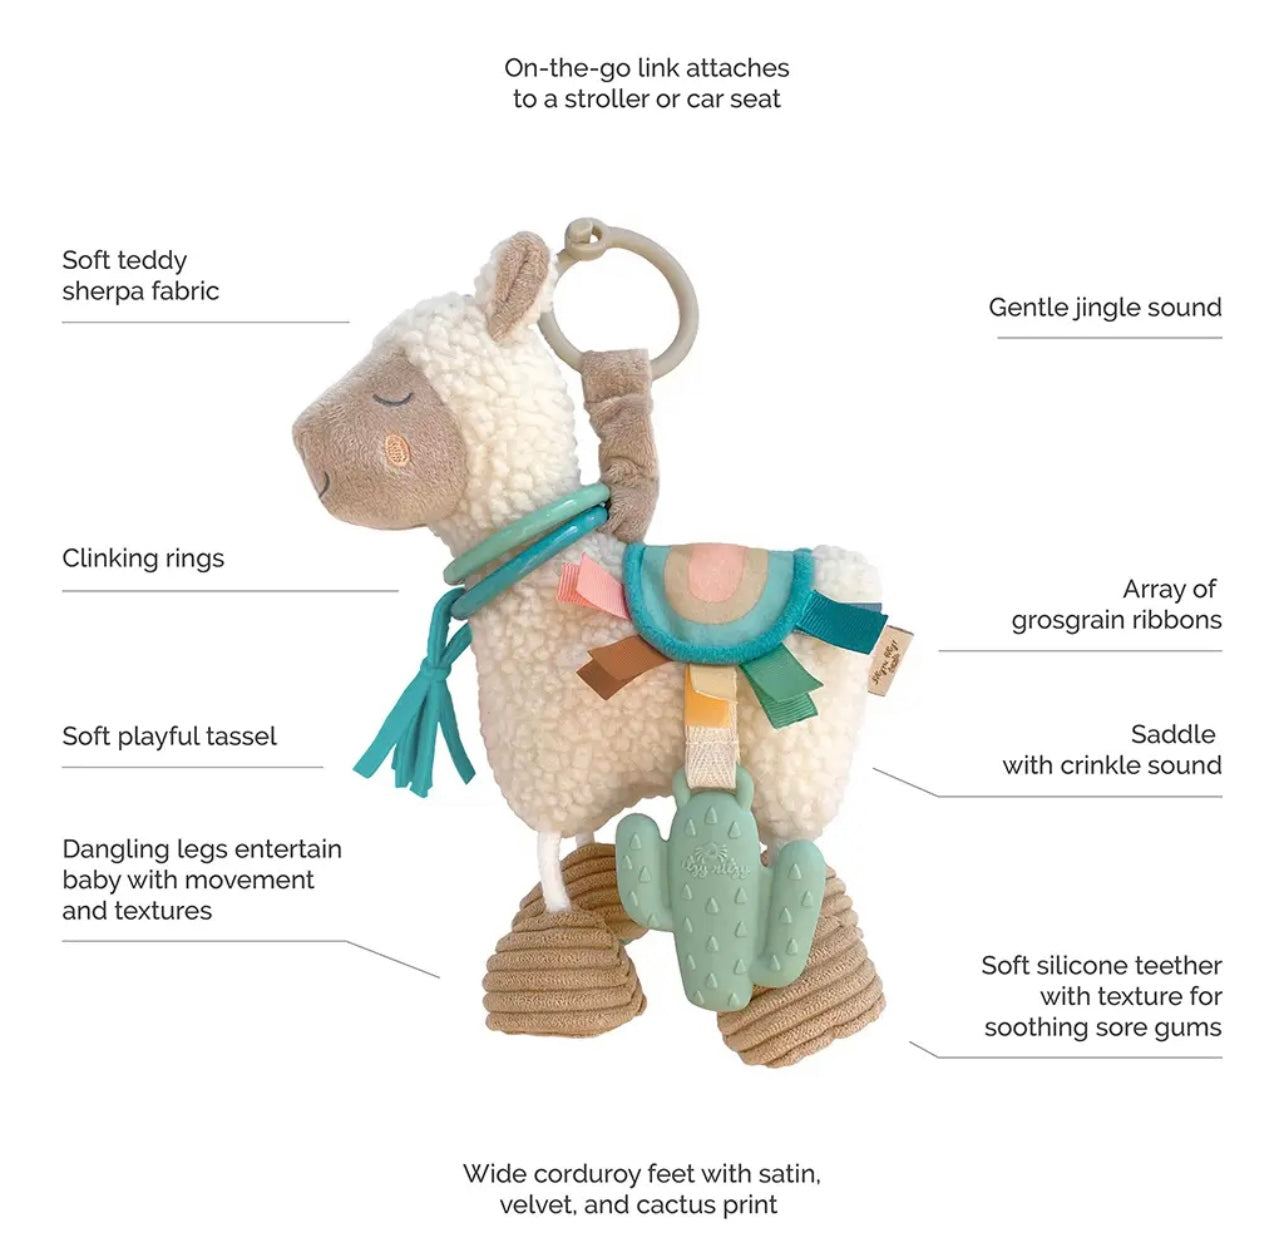 Link & Love™ Llama Activity Plush with Teether Toy